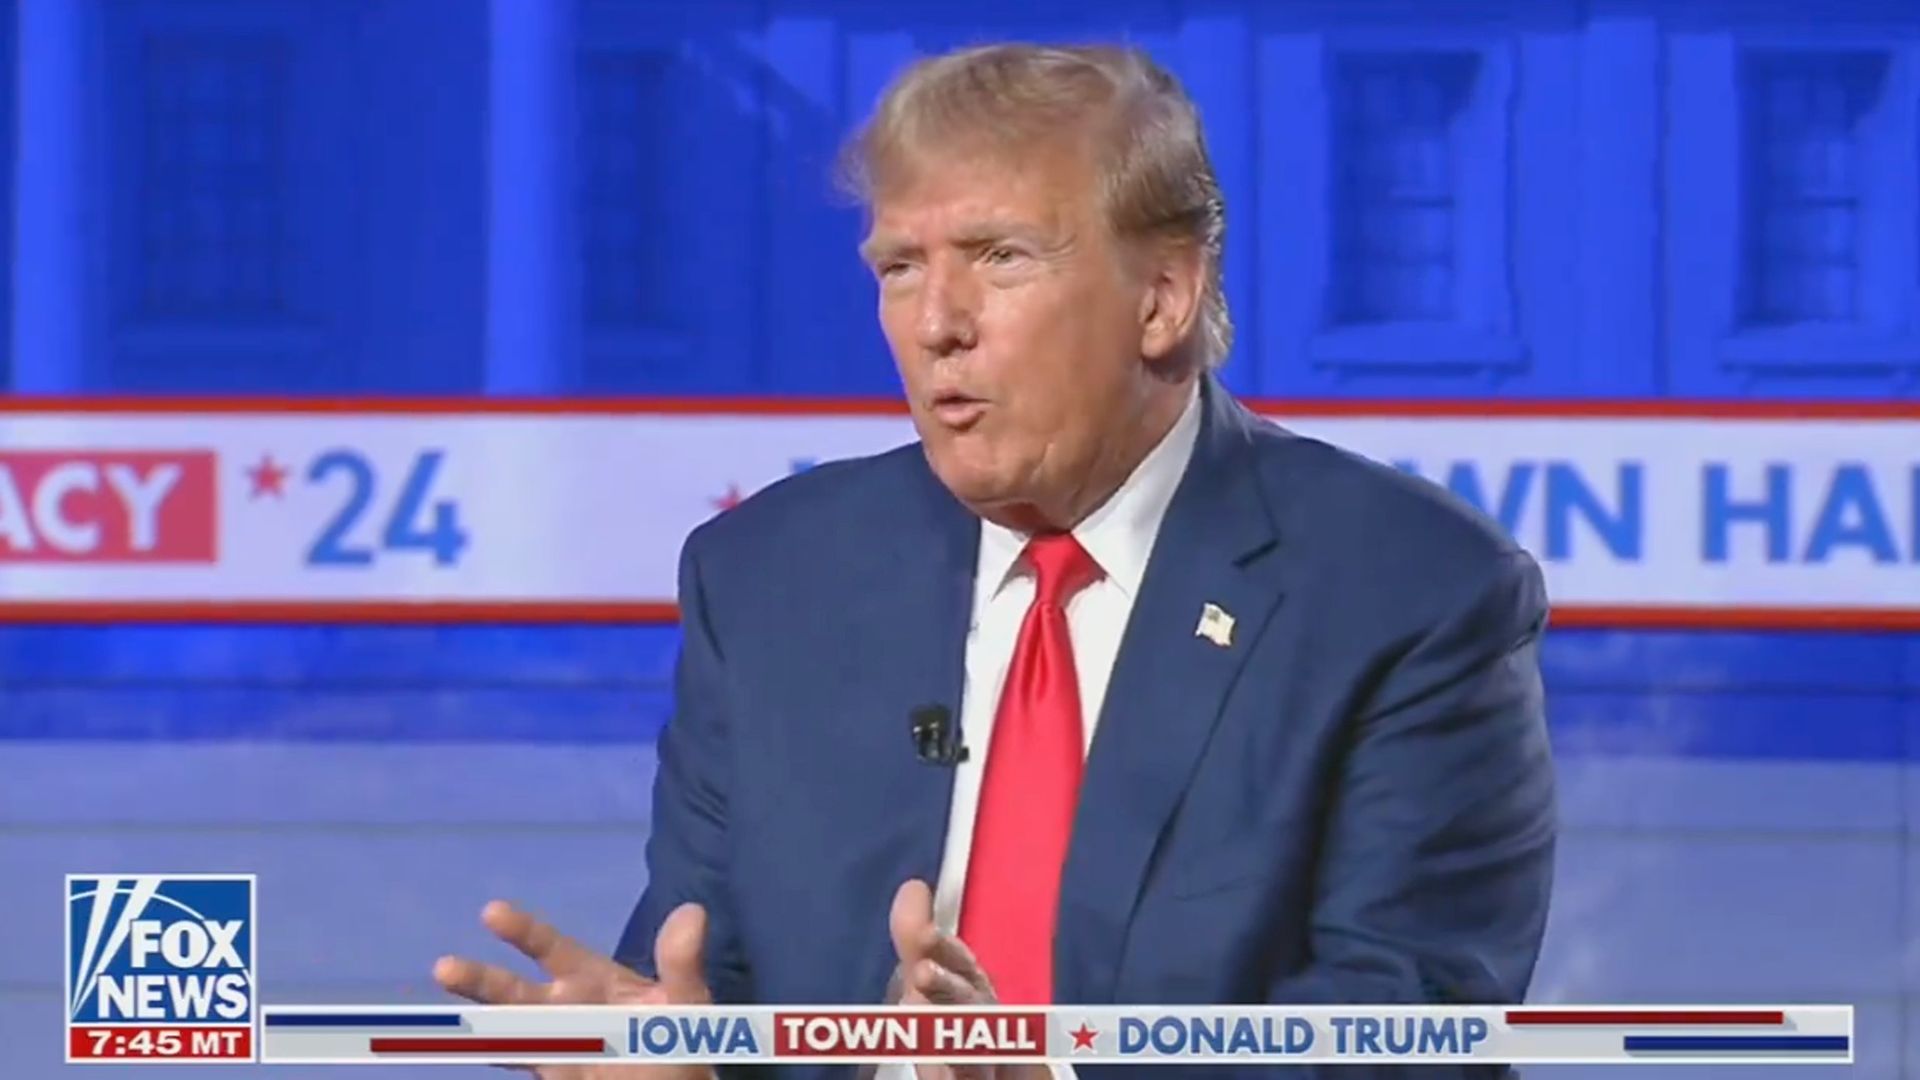 Former President Trump speaking during the Fox News town hall in Iowa.